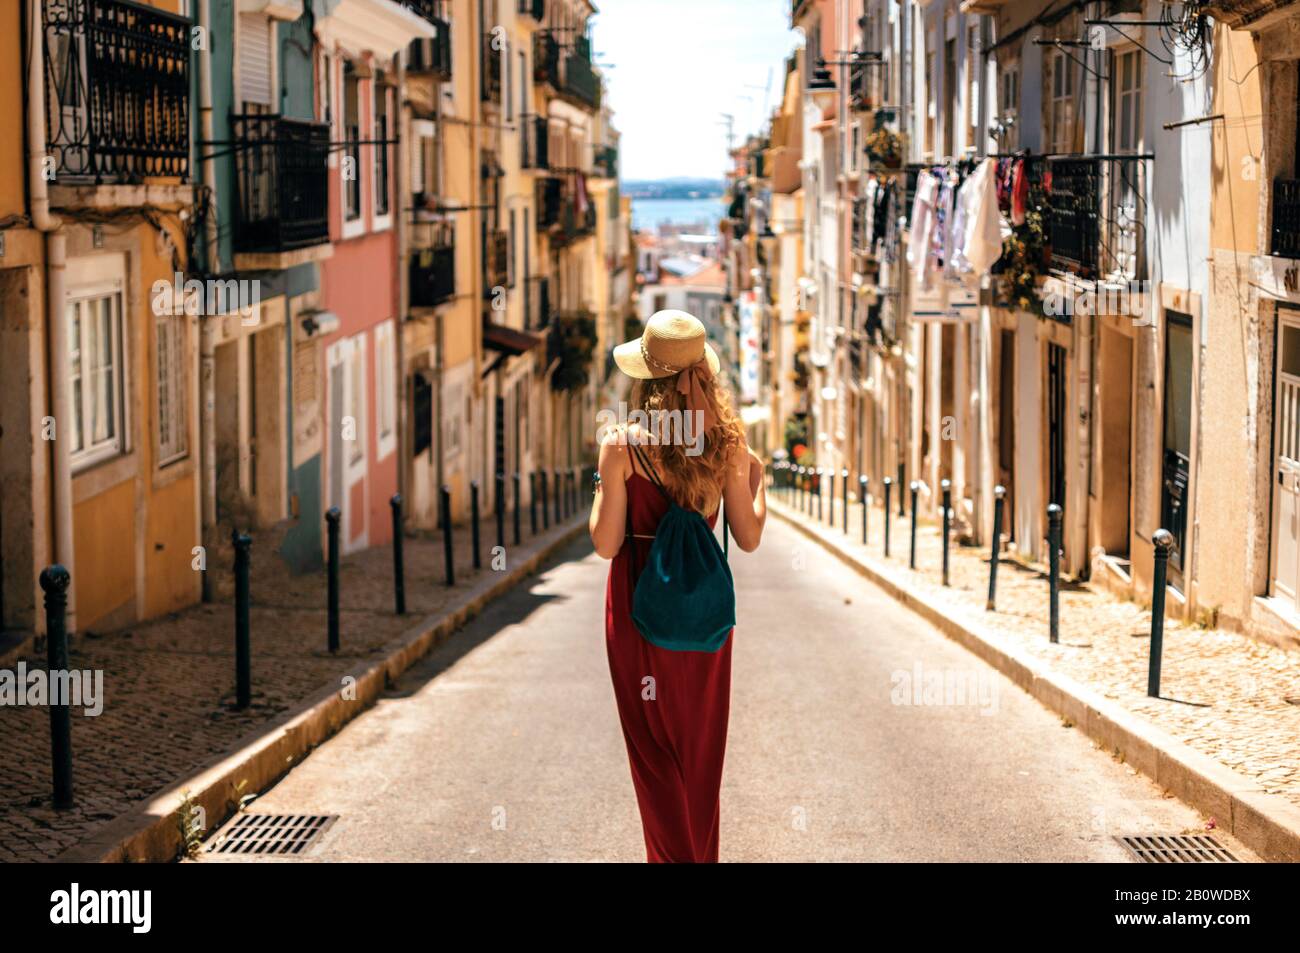 Traveler discovering spanish and portuguese cities Stock Photo